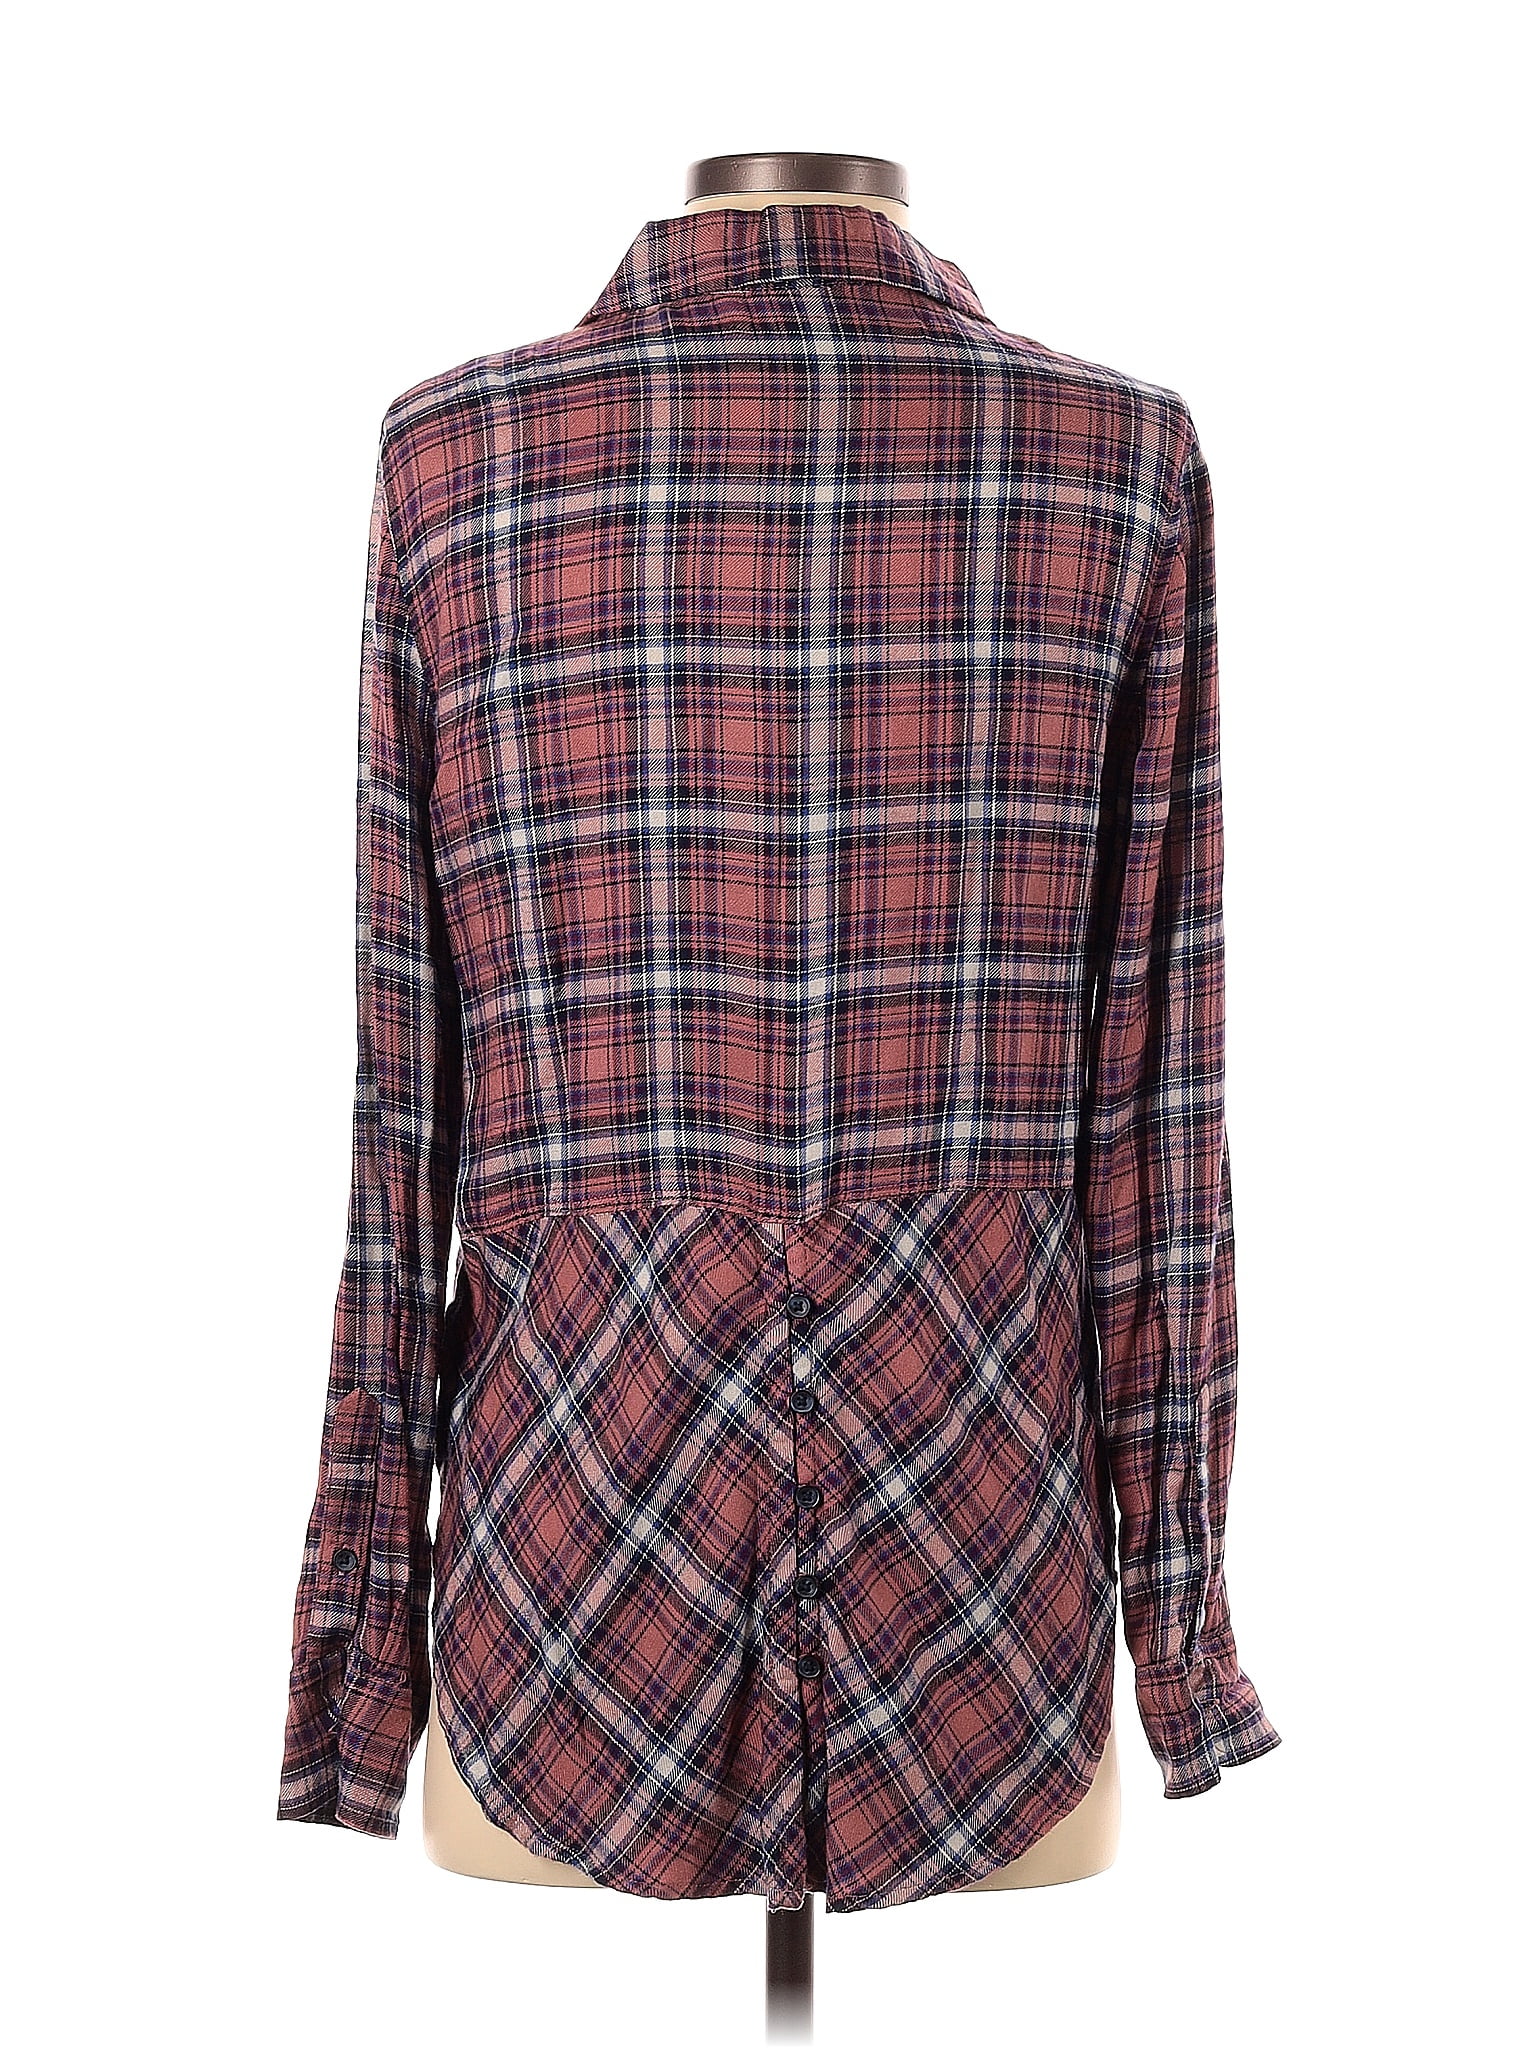 Lucky Brand Women's Plus-Size Bungalow Flannel Shirt, Red Plaid